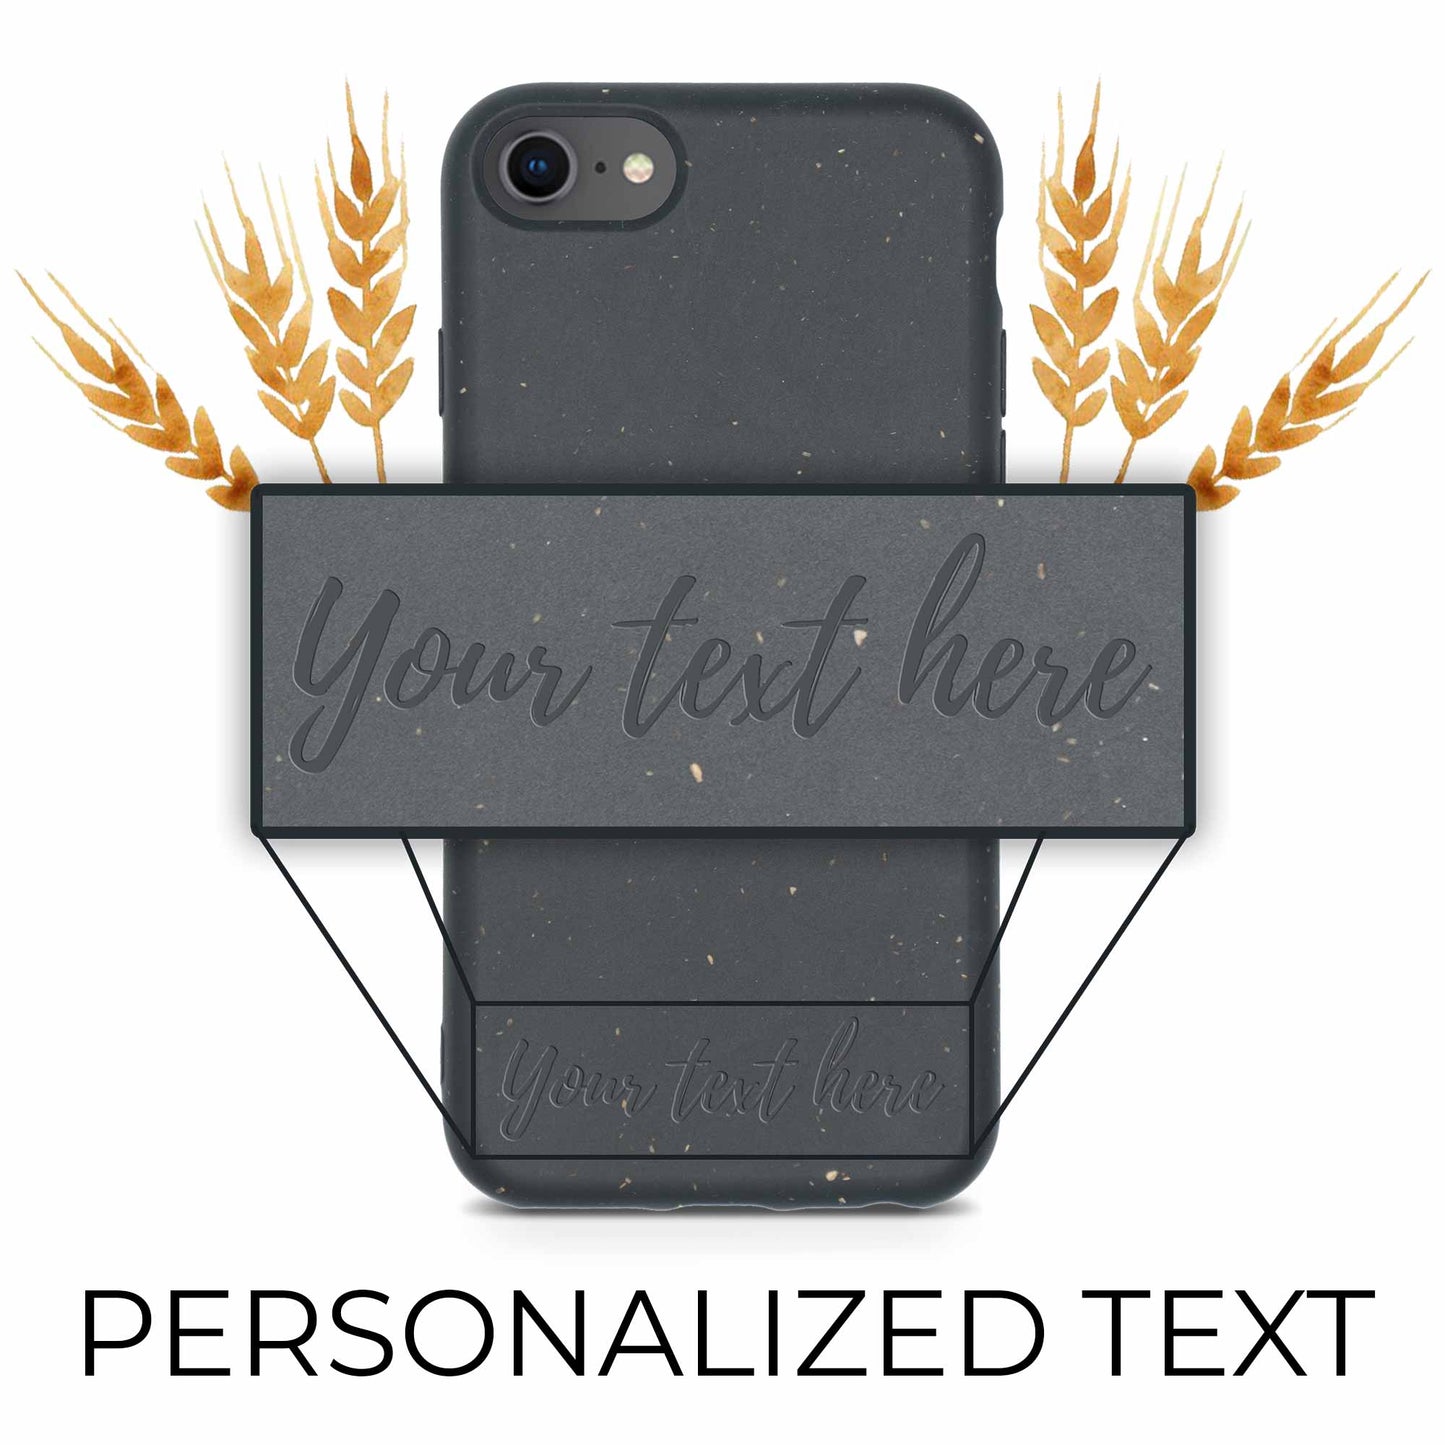 Customizable Eco-Friendly Biodegradable Phone Case, Black - Personalized Text Engraving